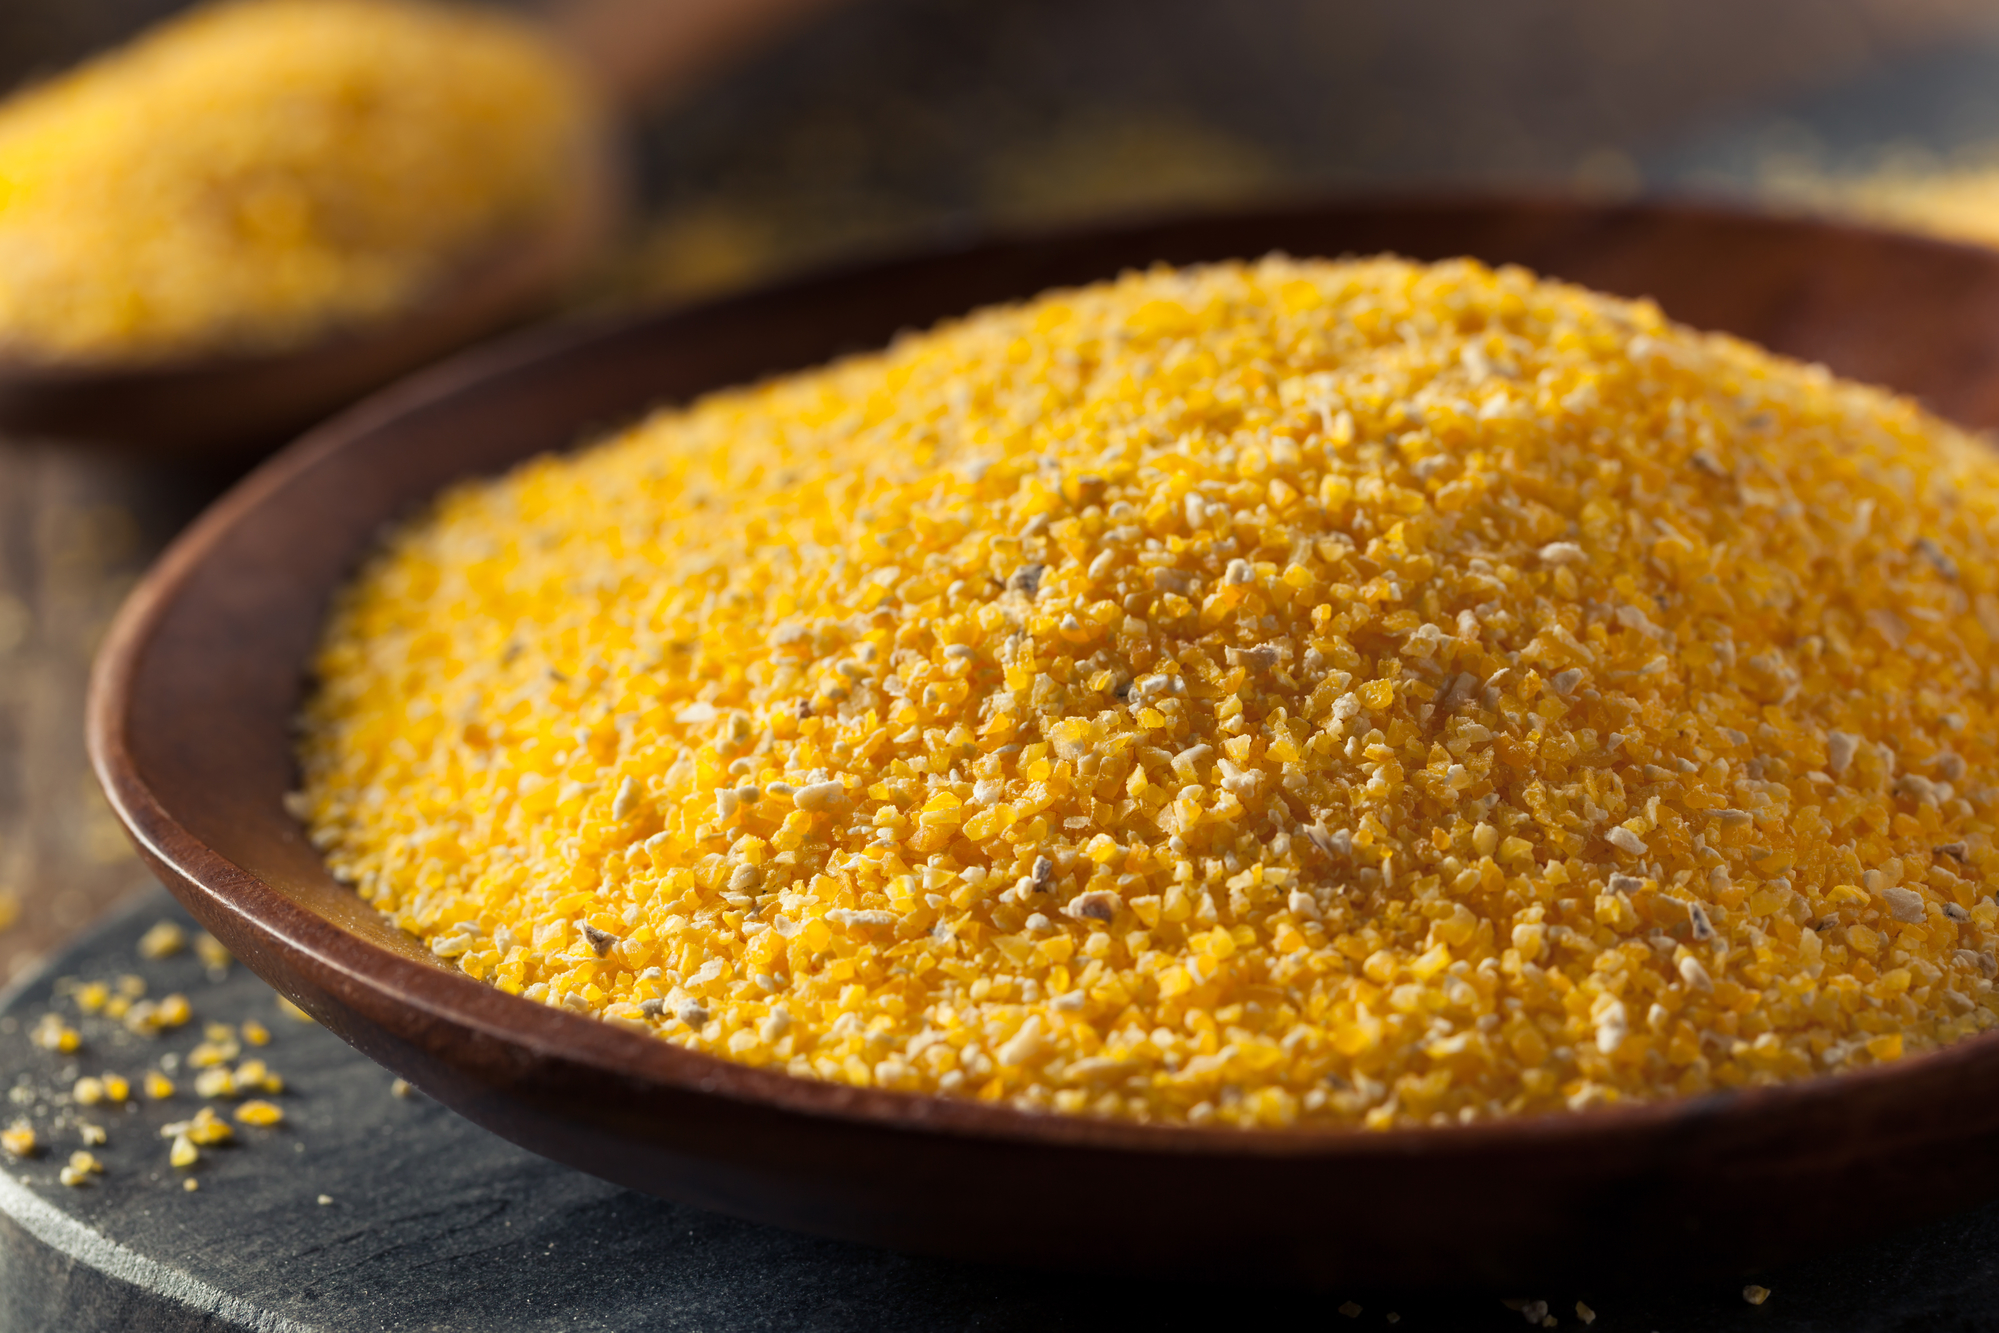 Corn meal in a bowl